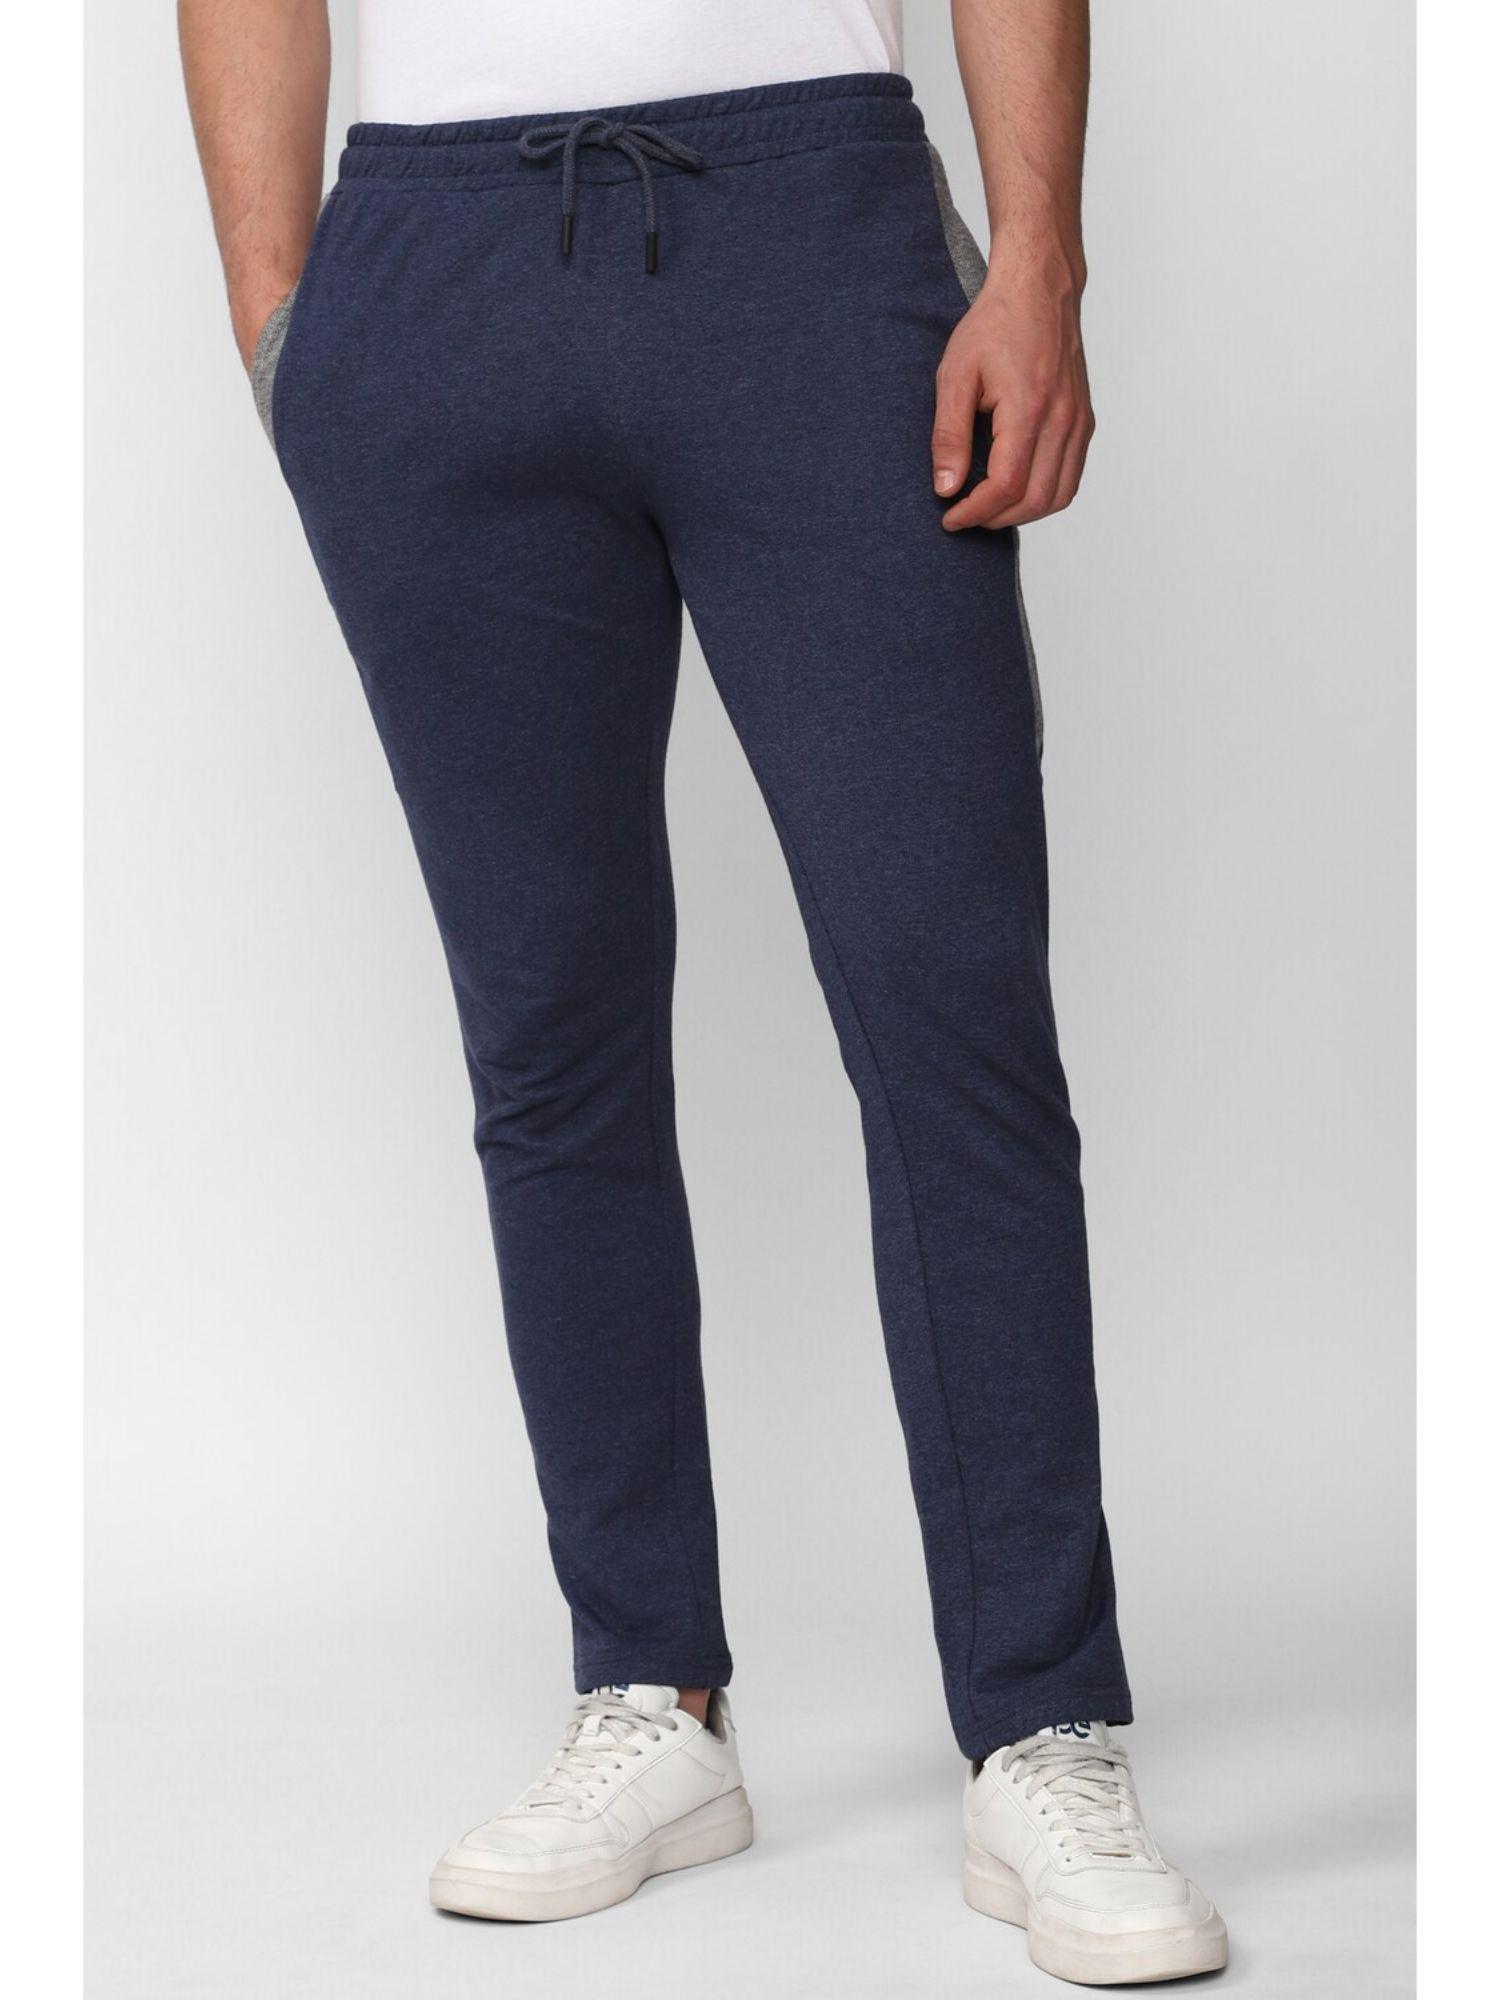 men-navy-solid-casual-track-pants